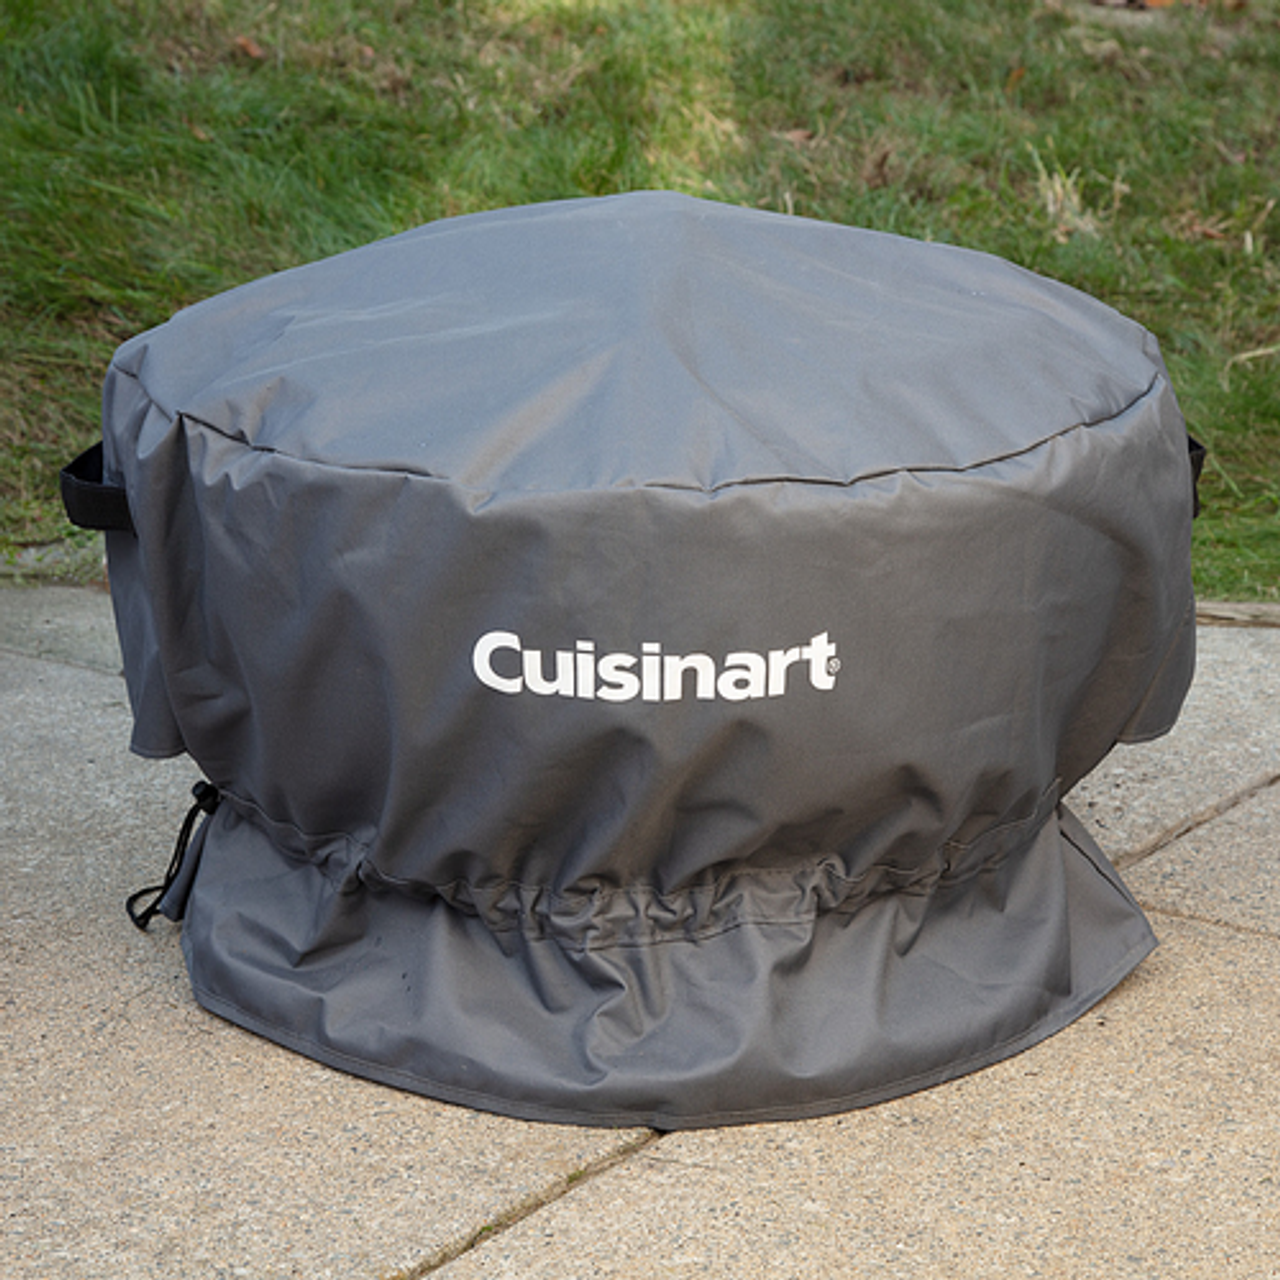 Cuisinart - Cleanburn Fire Pit Cover - Gray